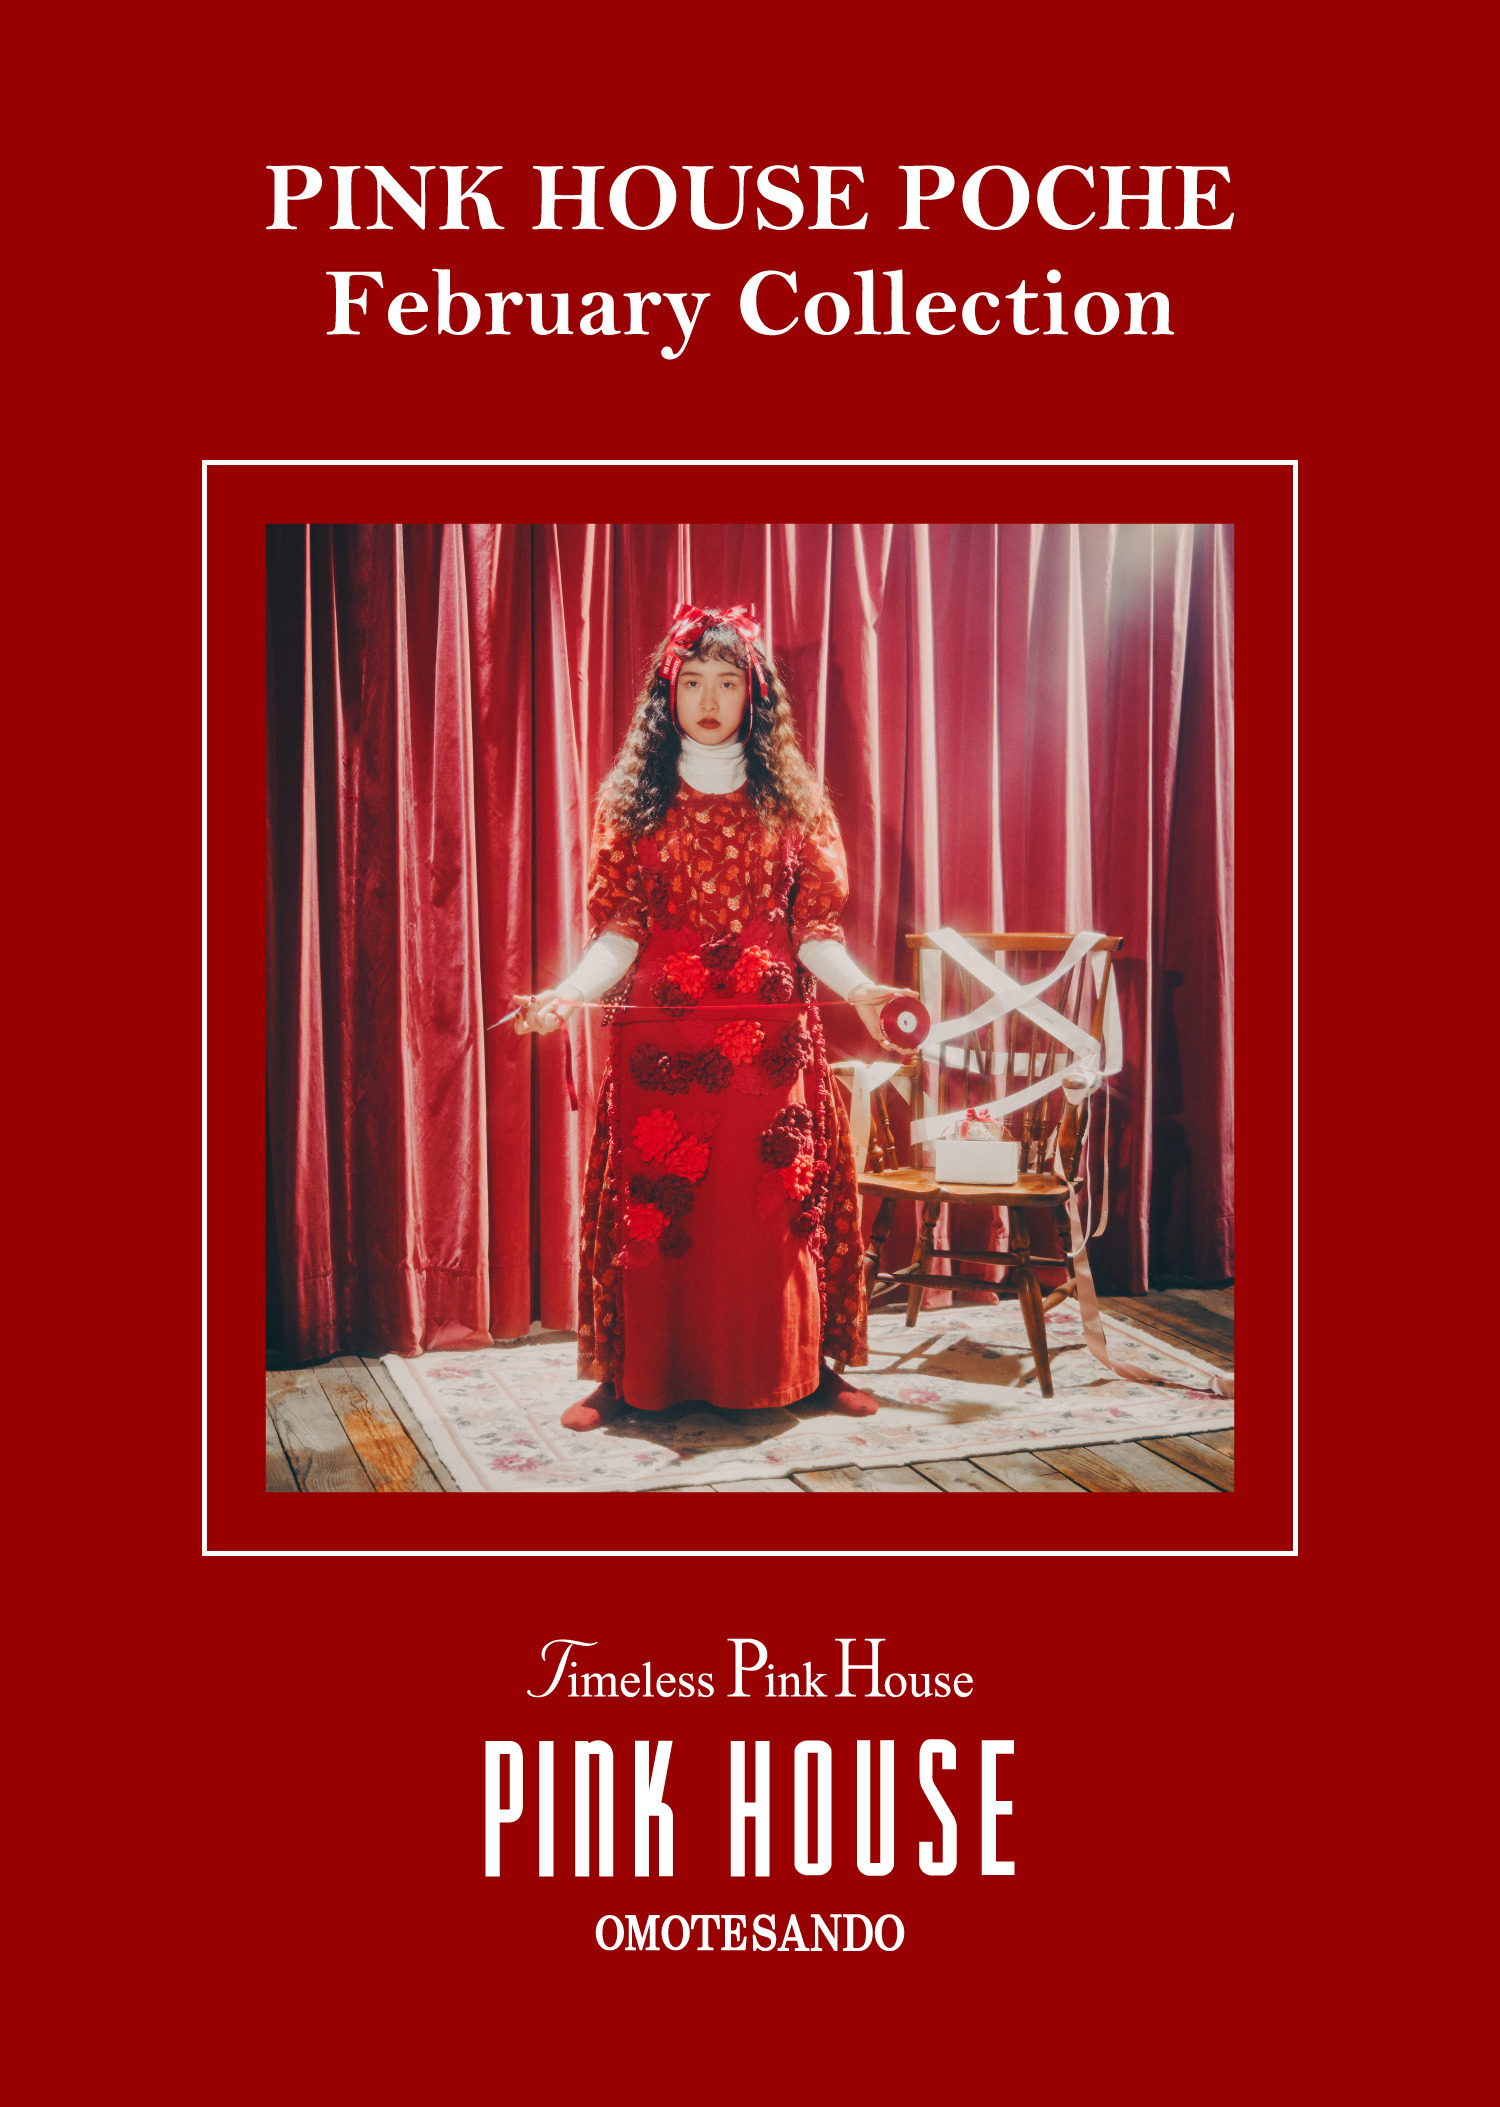 PINK HOUSE POCHE February Collection